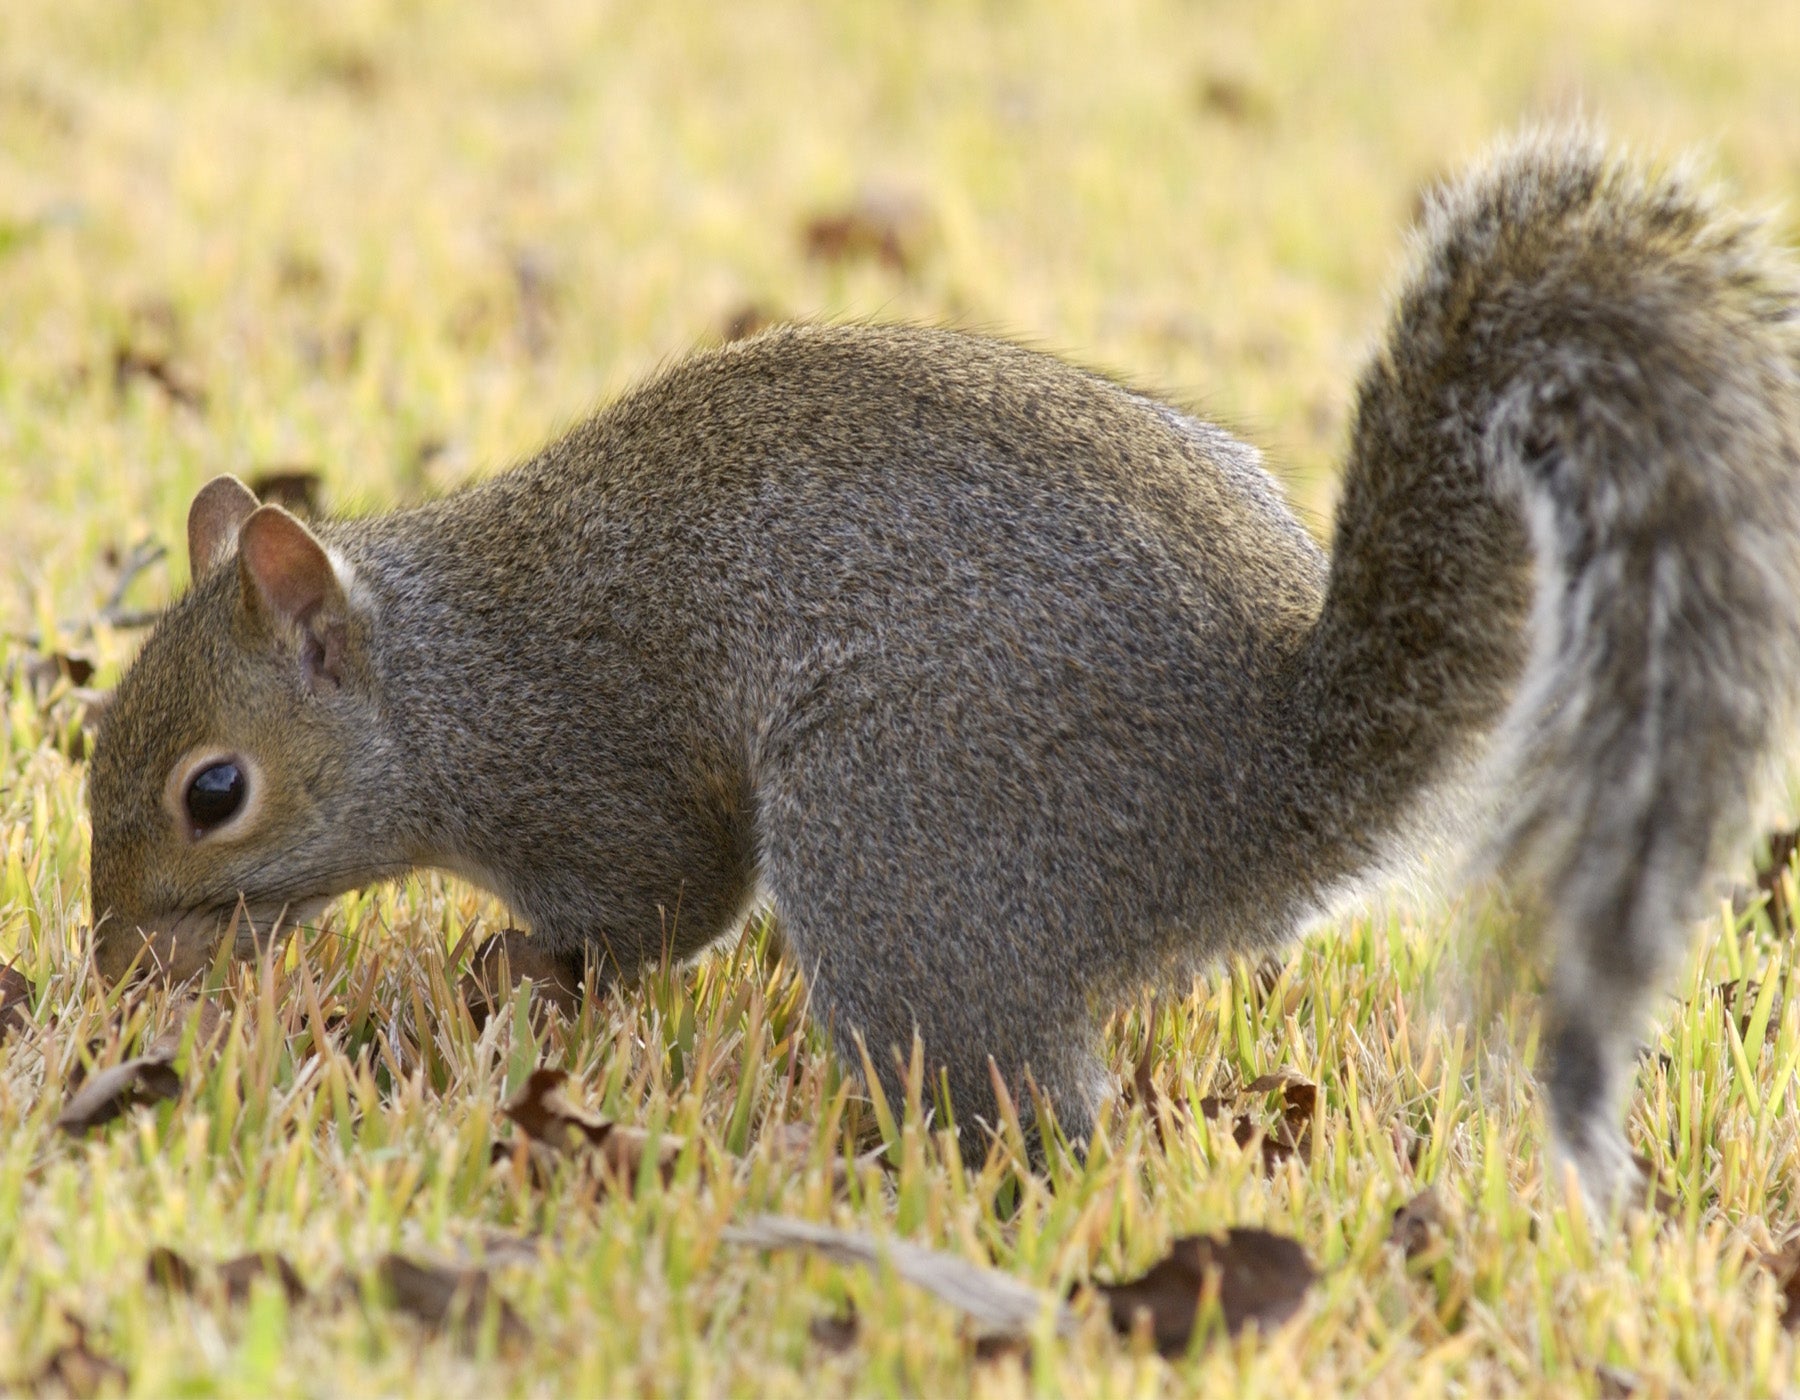 Image of a gray squirrel